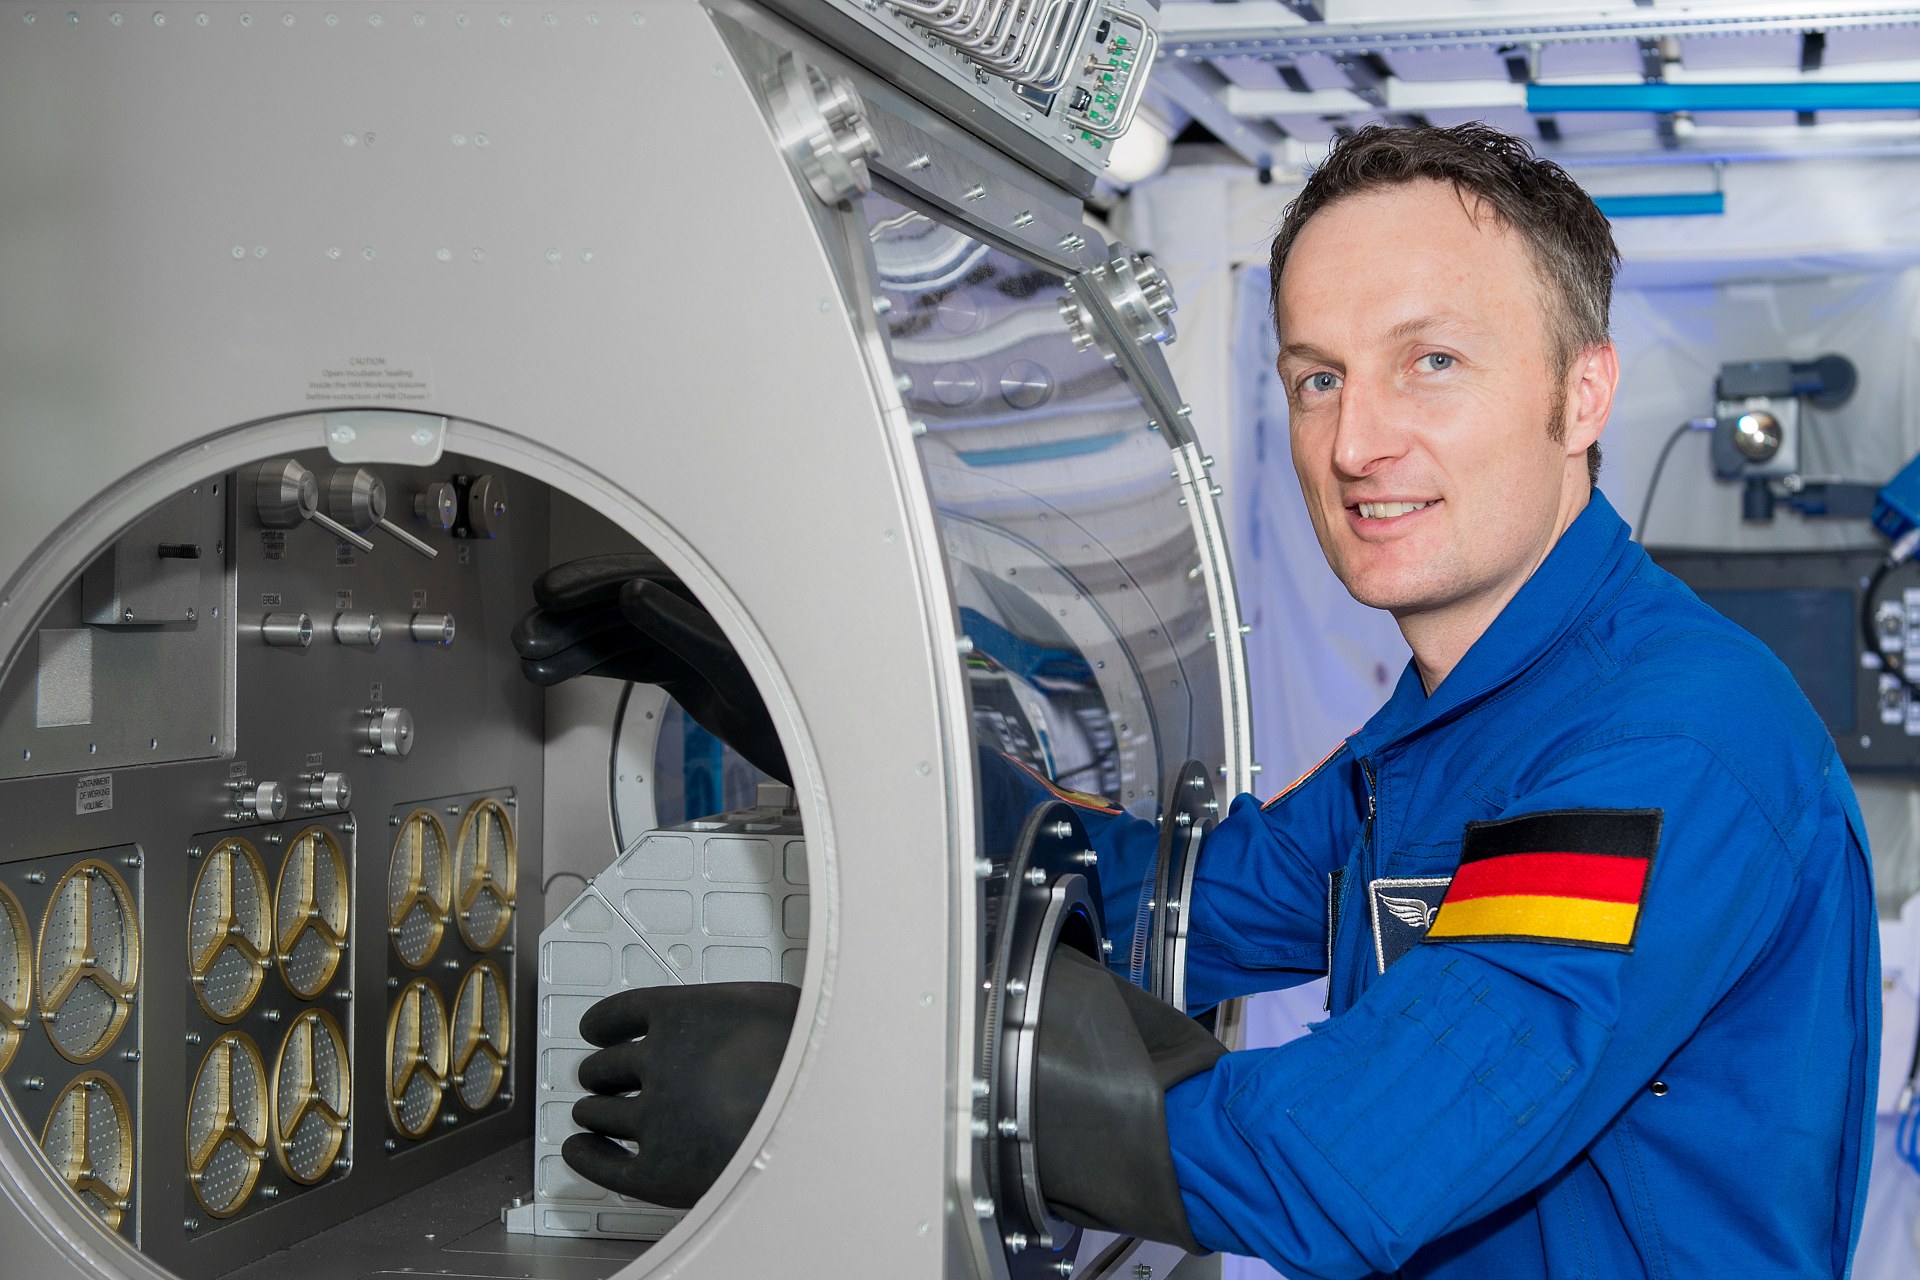 Matthias Maurer is bound for the ISS